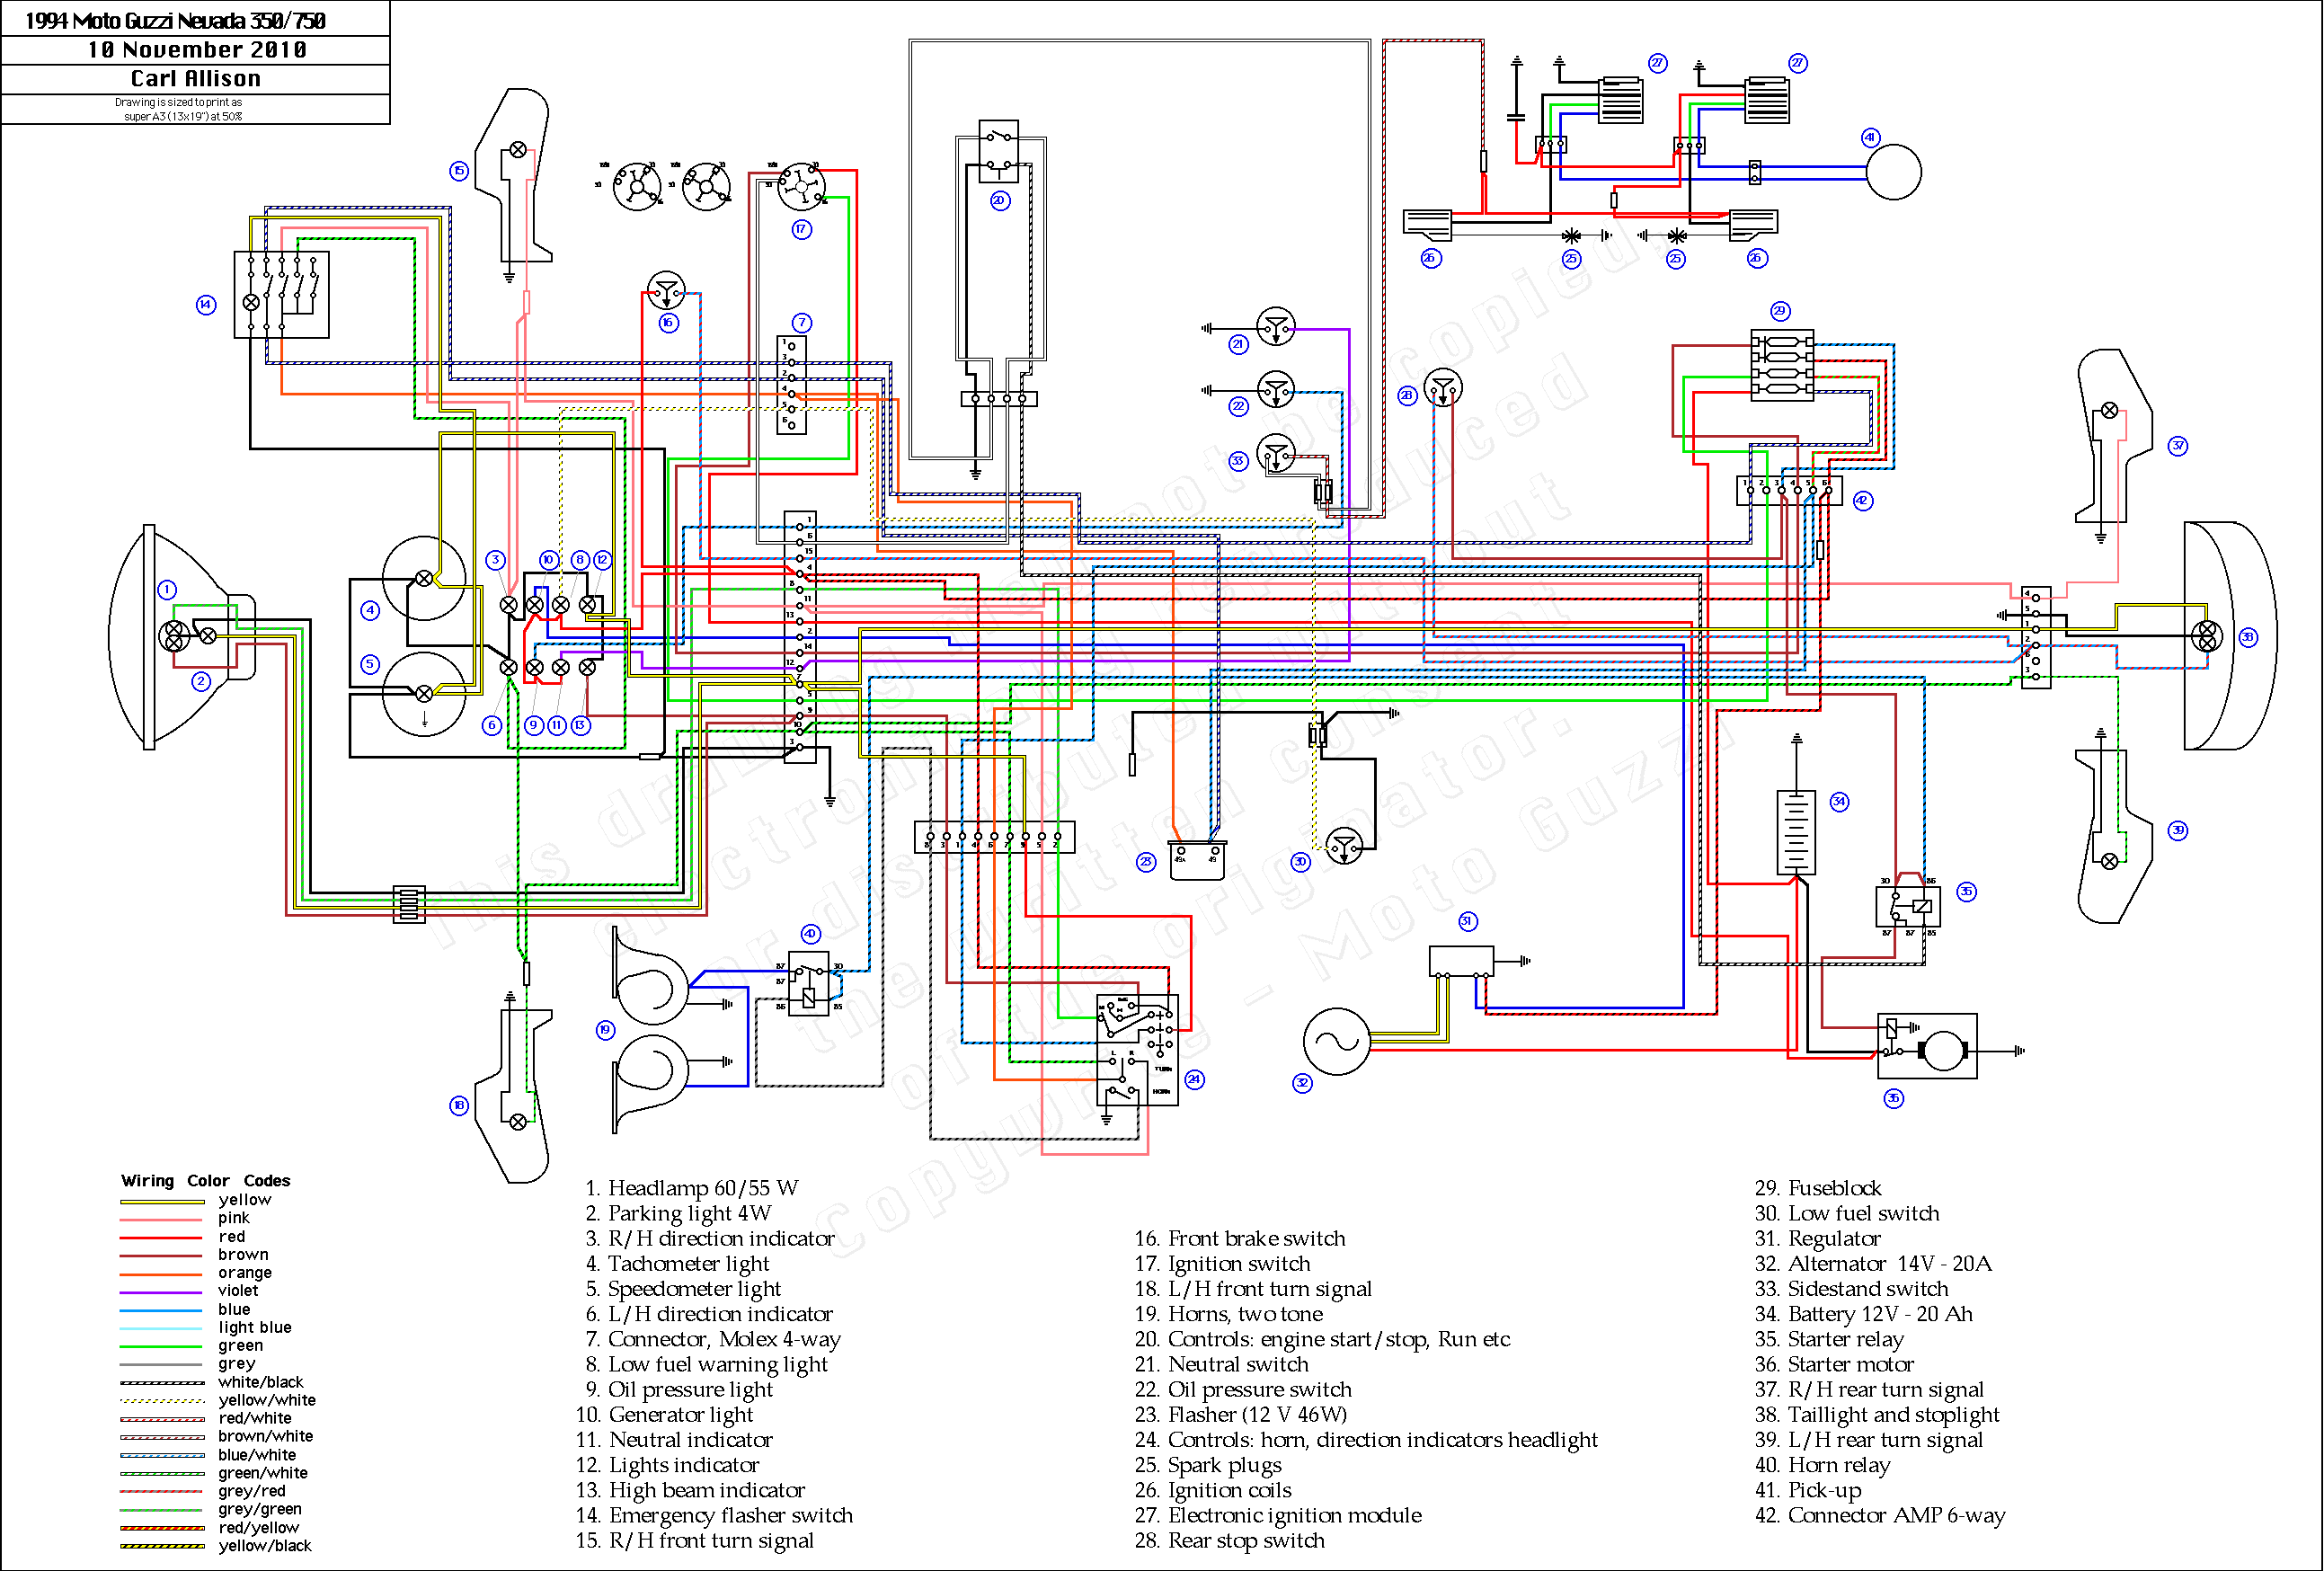 Motorcycle Tach Wiring Diagram from www.thisoldtractor.com